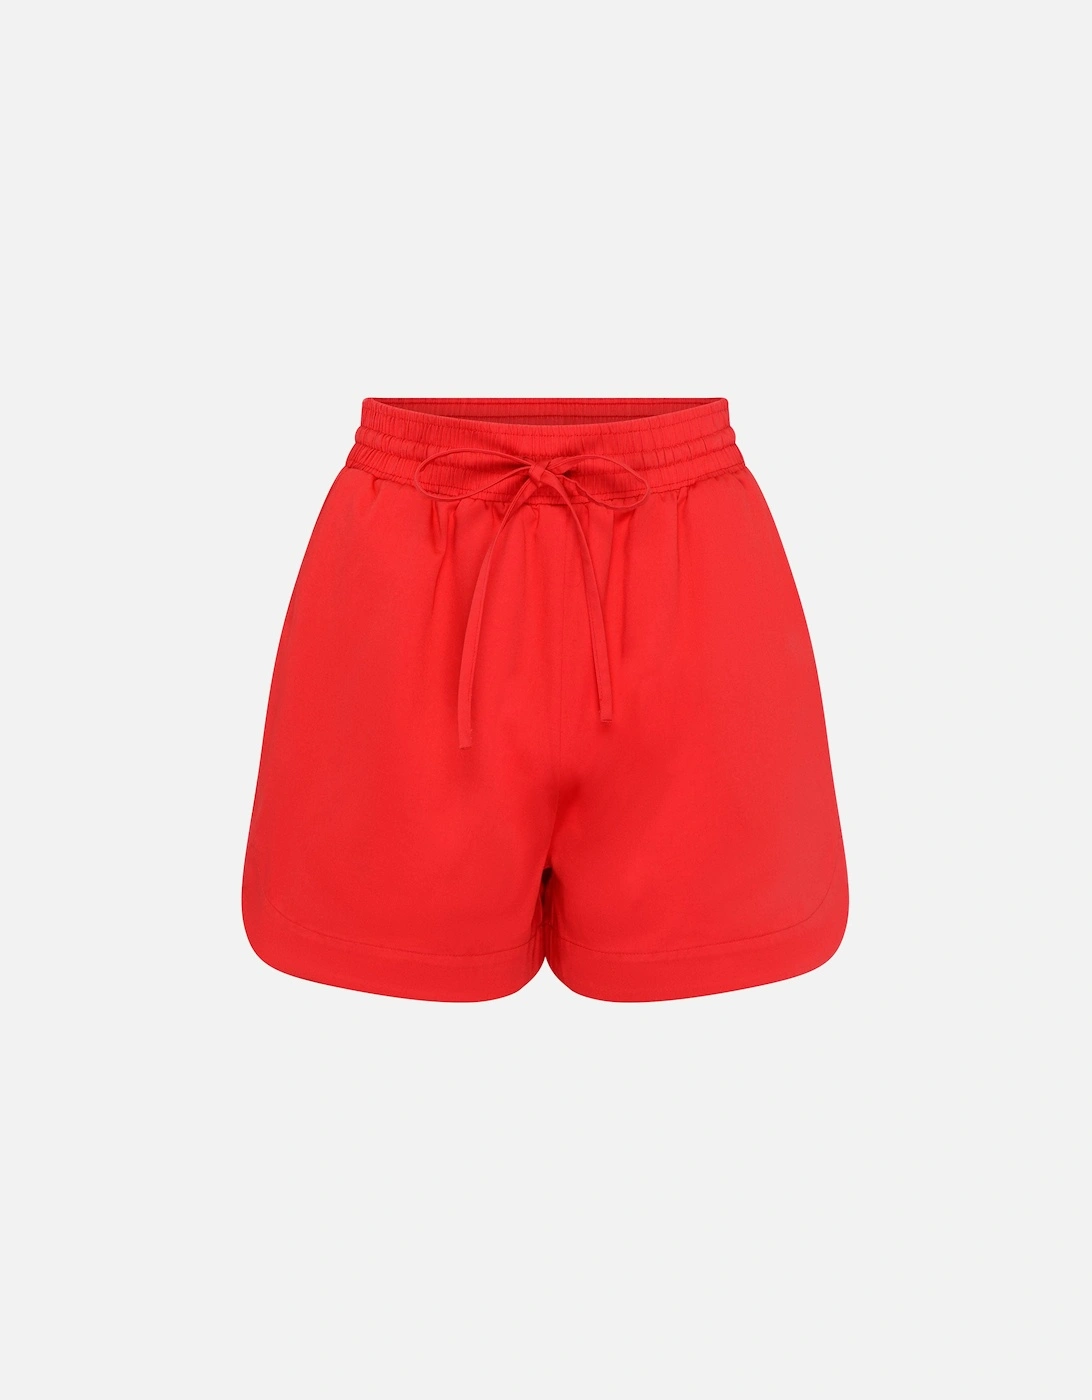 Sunny Shorts in Red